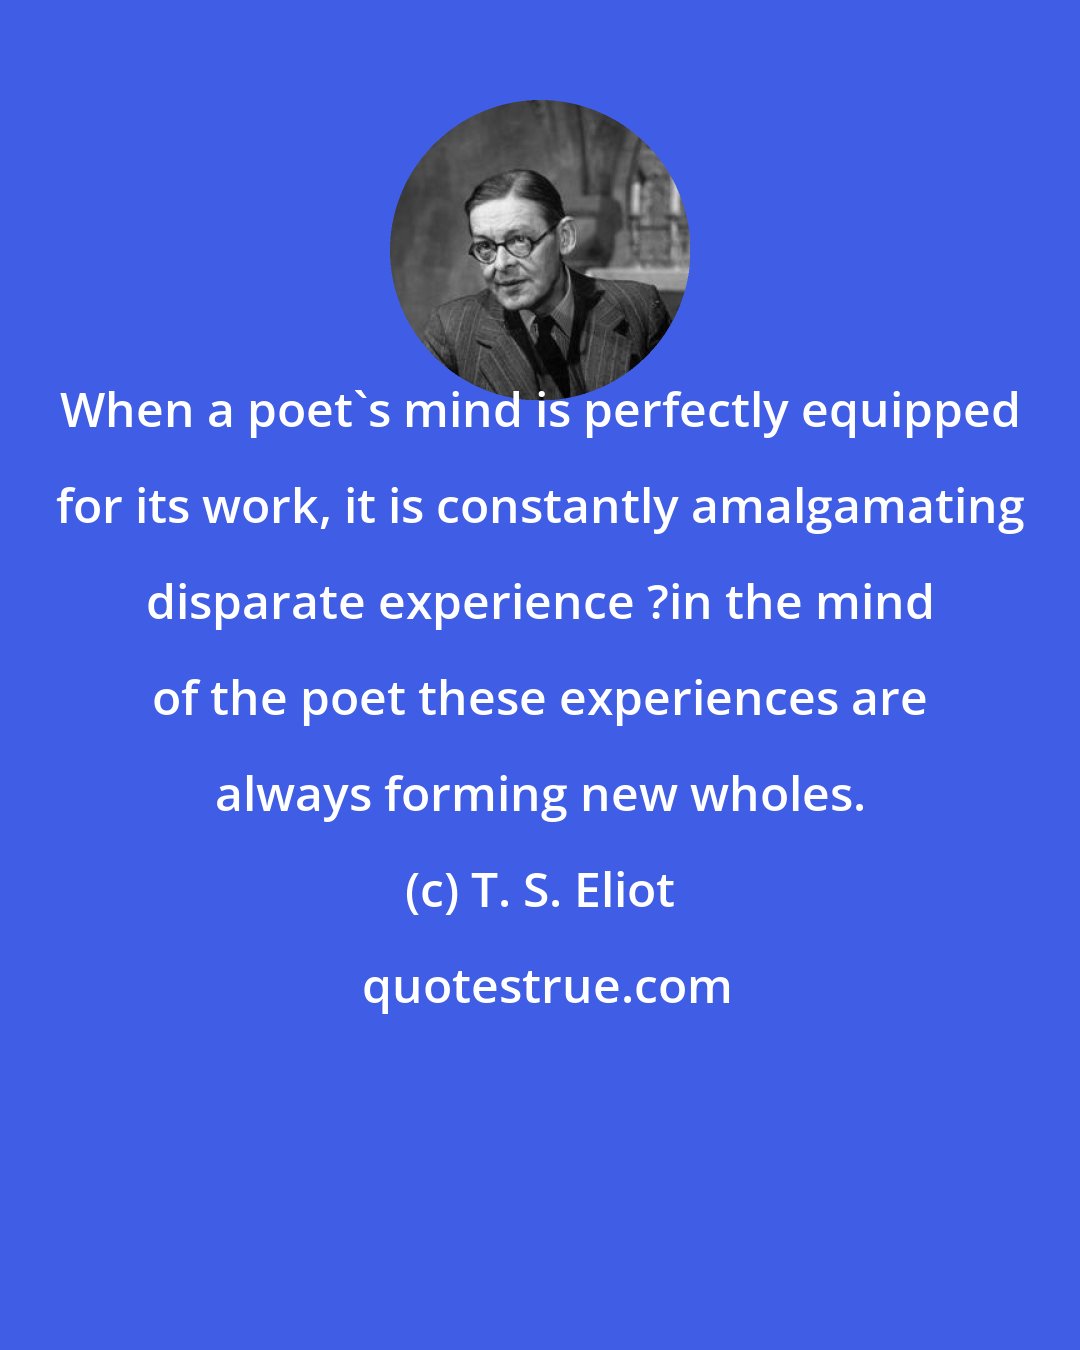 T. S. Eliot: When a poet's mind is perfectly equipped for its work, it is constantly amalgamating disparate experience ?in the mind of the poet these experiences are always forming new wholes.